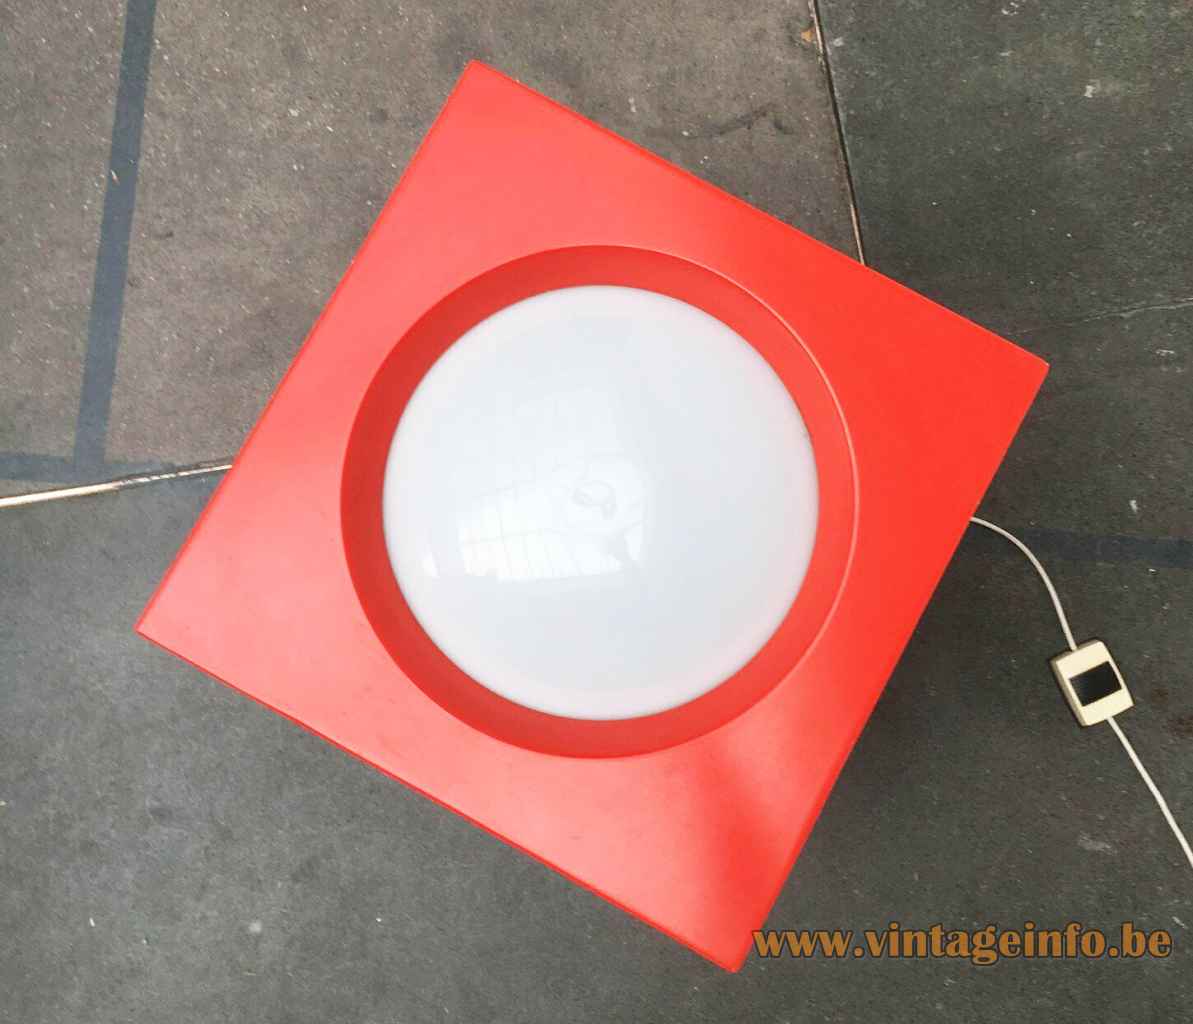 BAG Turgi cube floor lamp red metal lampshade 5 round white opal diffusers 1960s top view